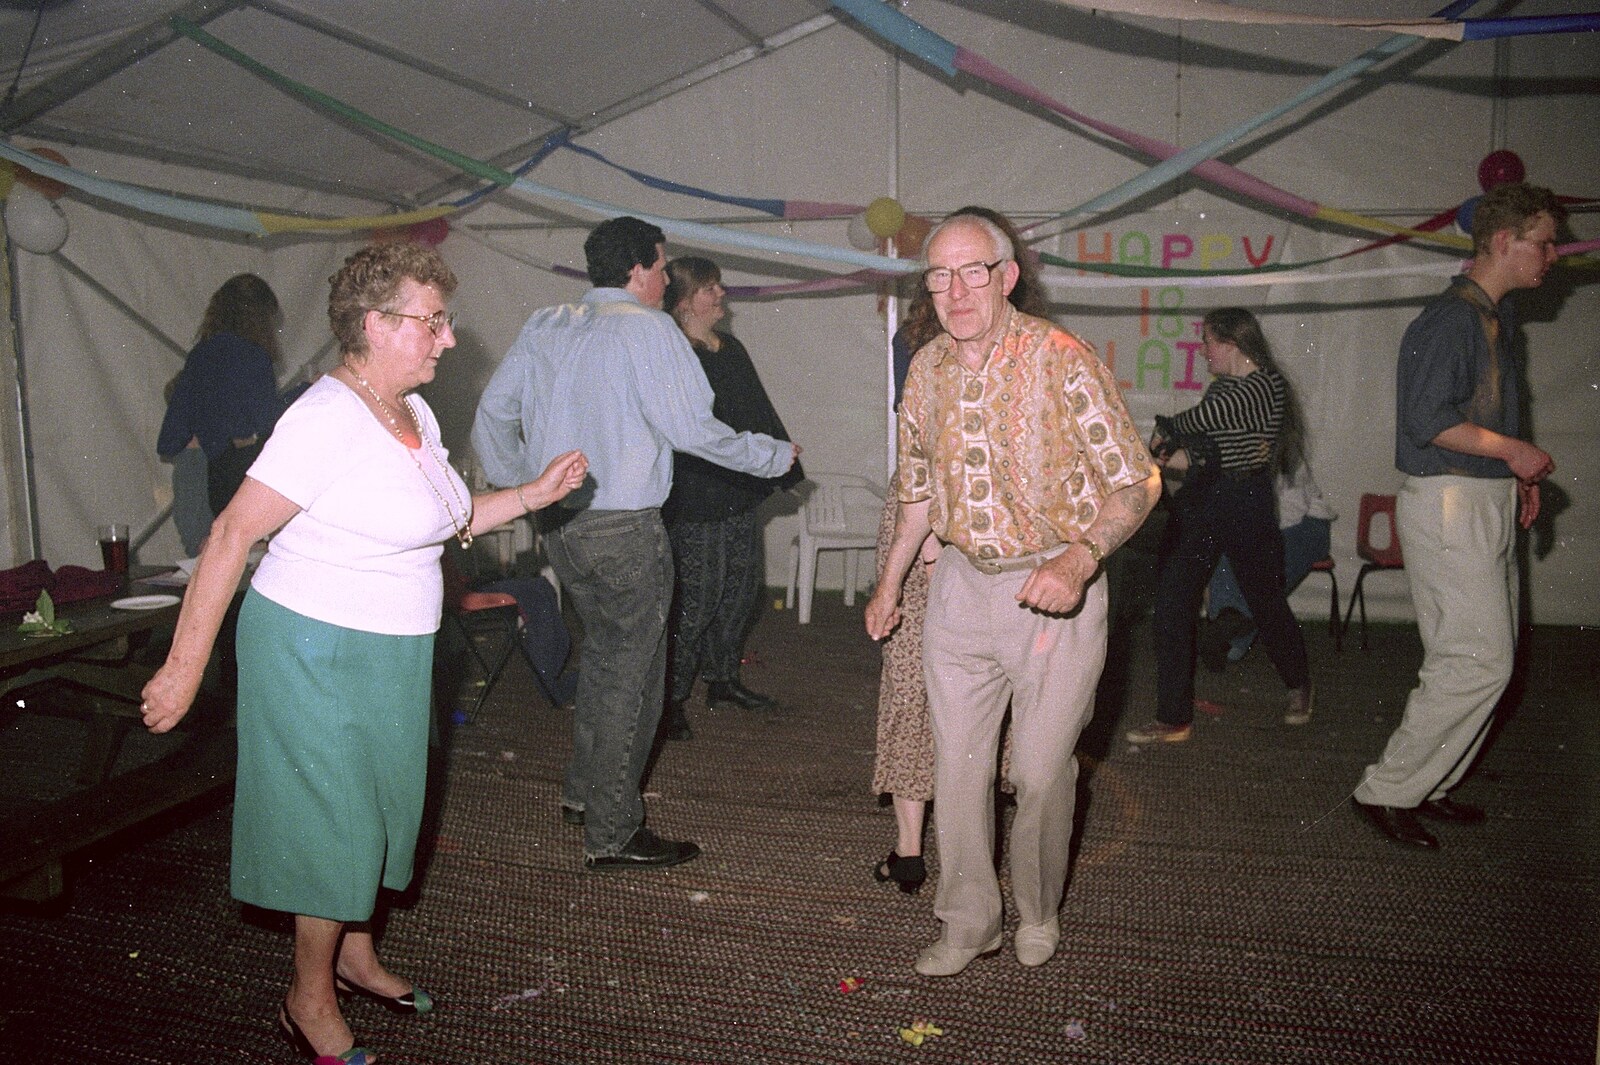 Arline and John get their freak on from Claire's Eighteenth Birthday, The Swan Inn, Brome, Suffolk - 11th June 1994